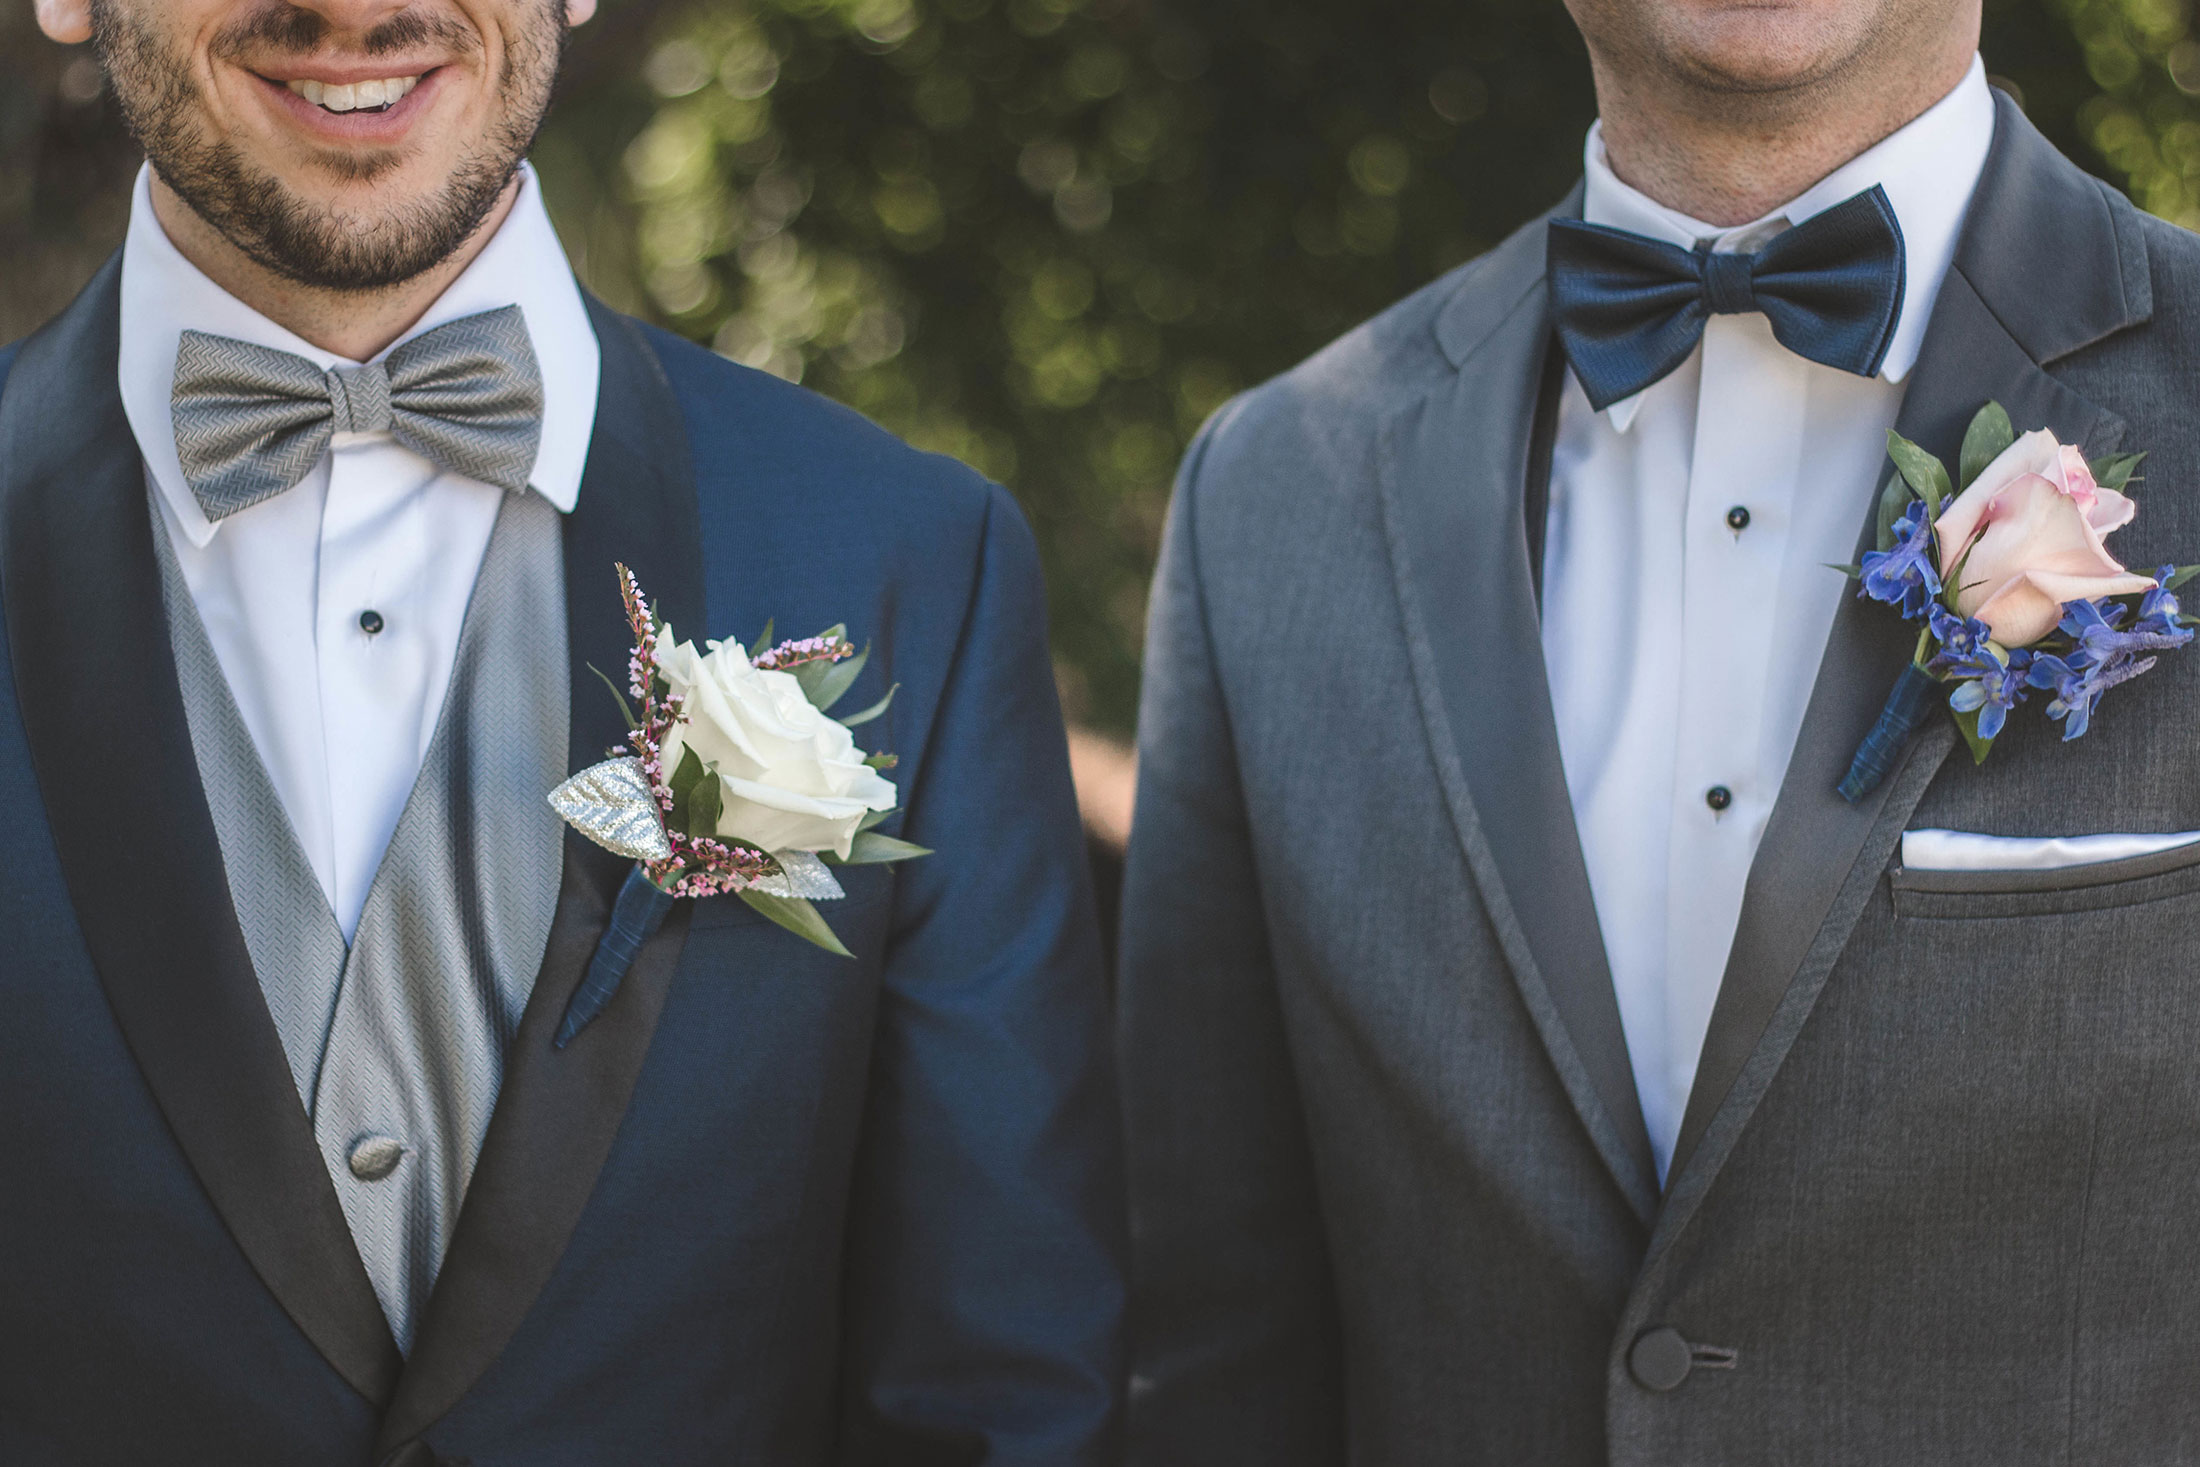 Boutonniere: Why Does a Groom Wear One? | SEG Do Guys Wear Boutonnieres To Homecoming